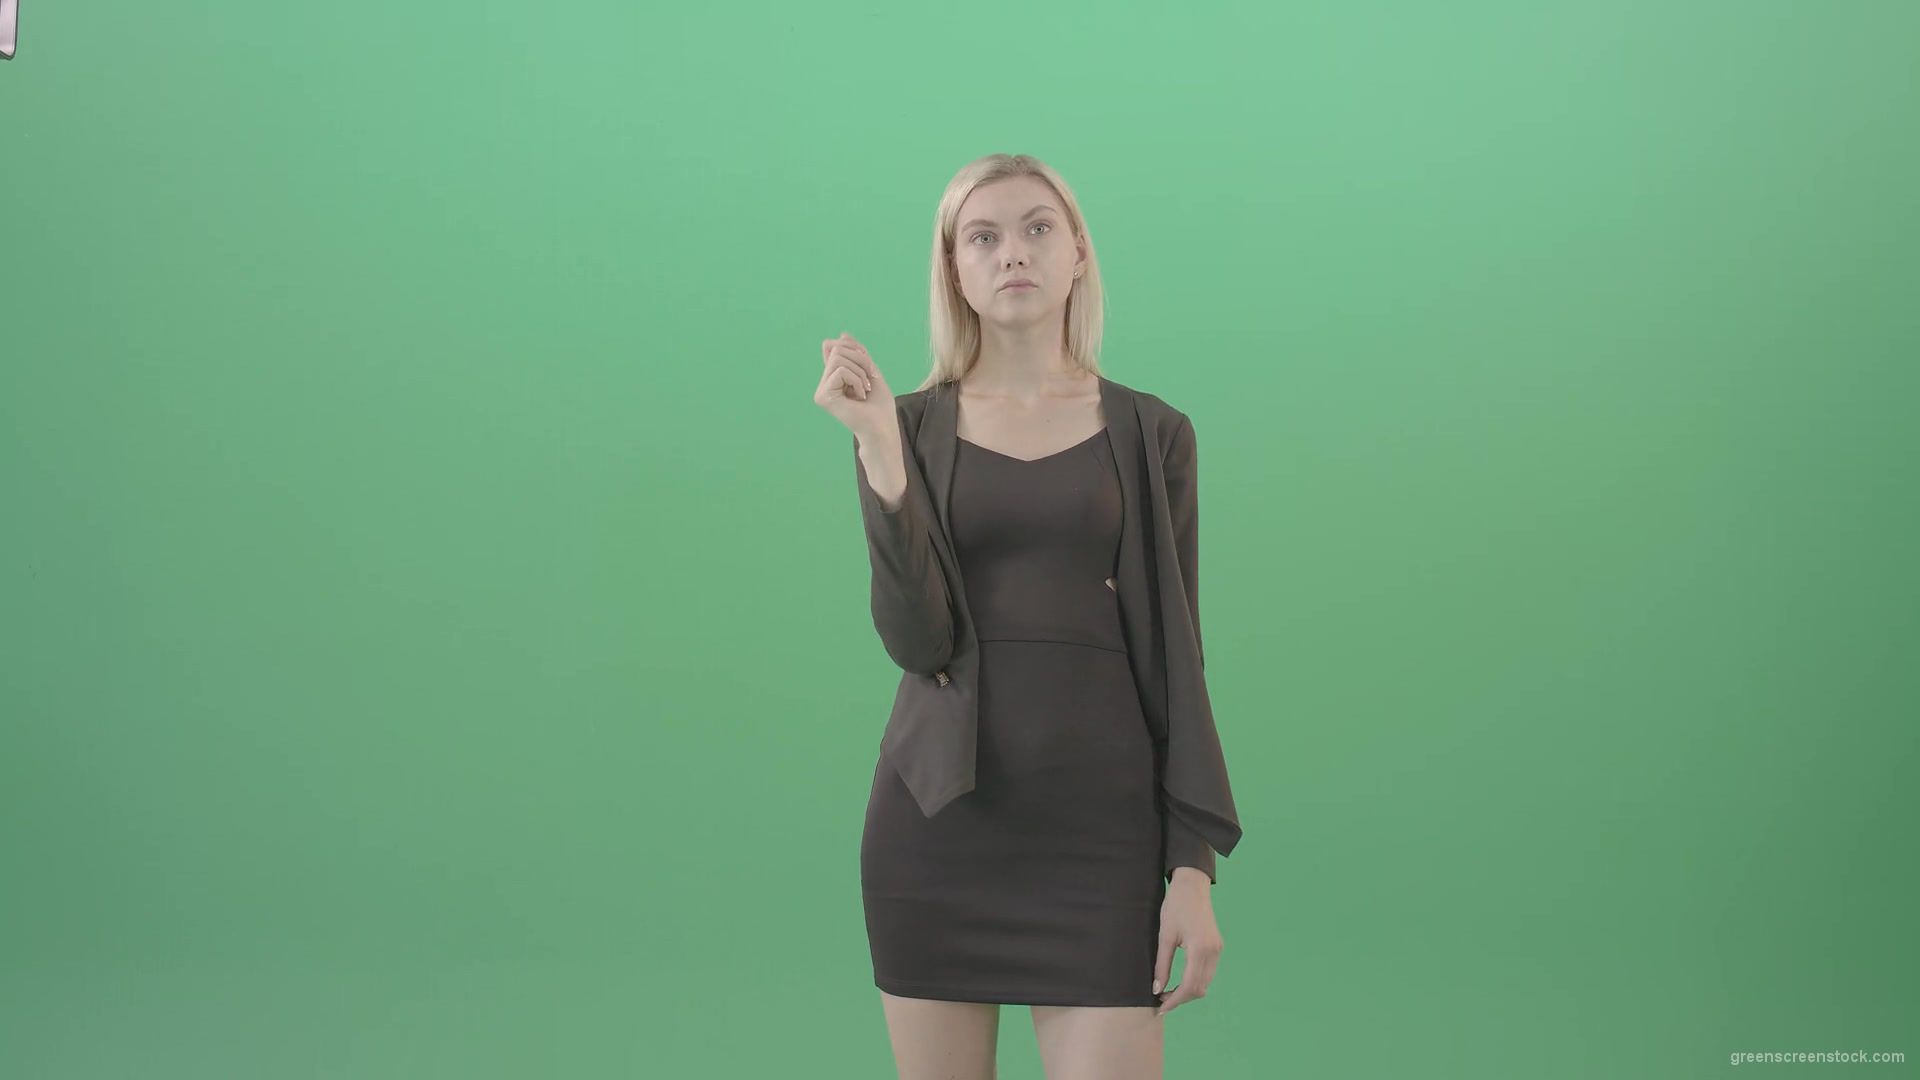 Girl-searching-in-internet-virtual-shopping-on-touch-screen-on-green-background-4K-Video-Footage-1920_007 Green Screen Stock